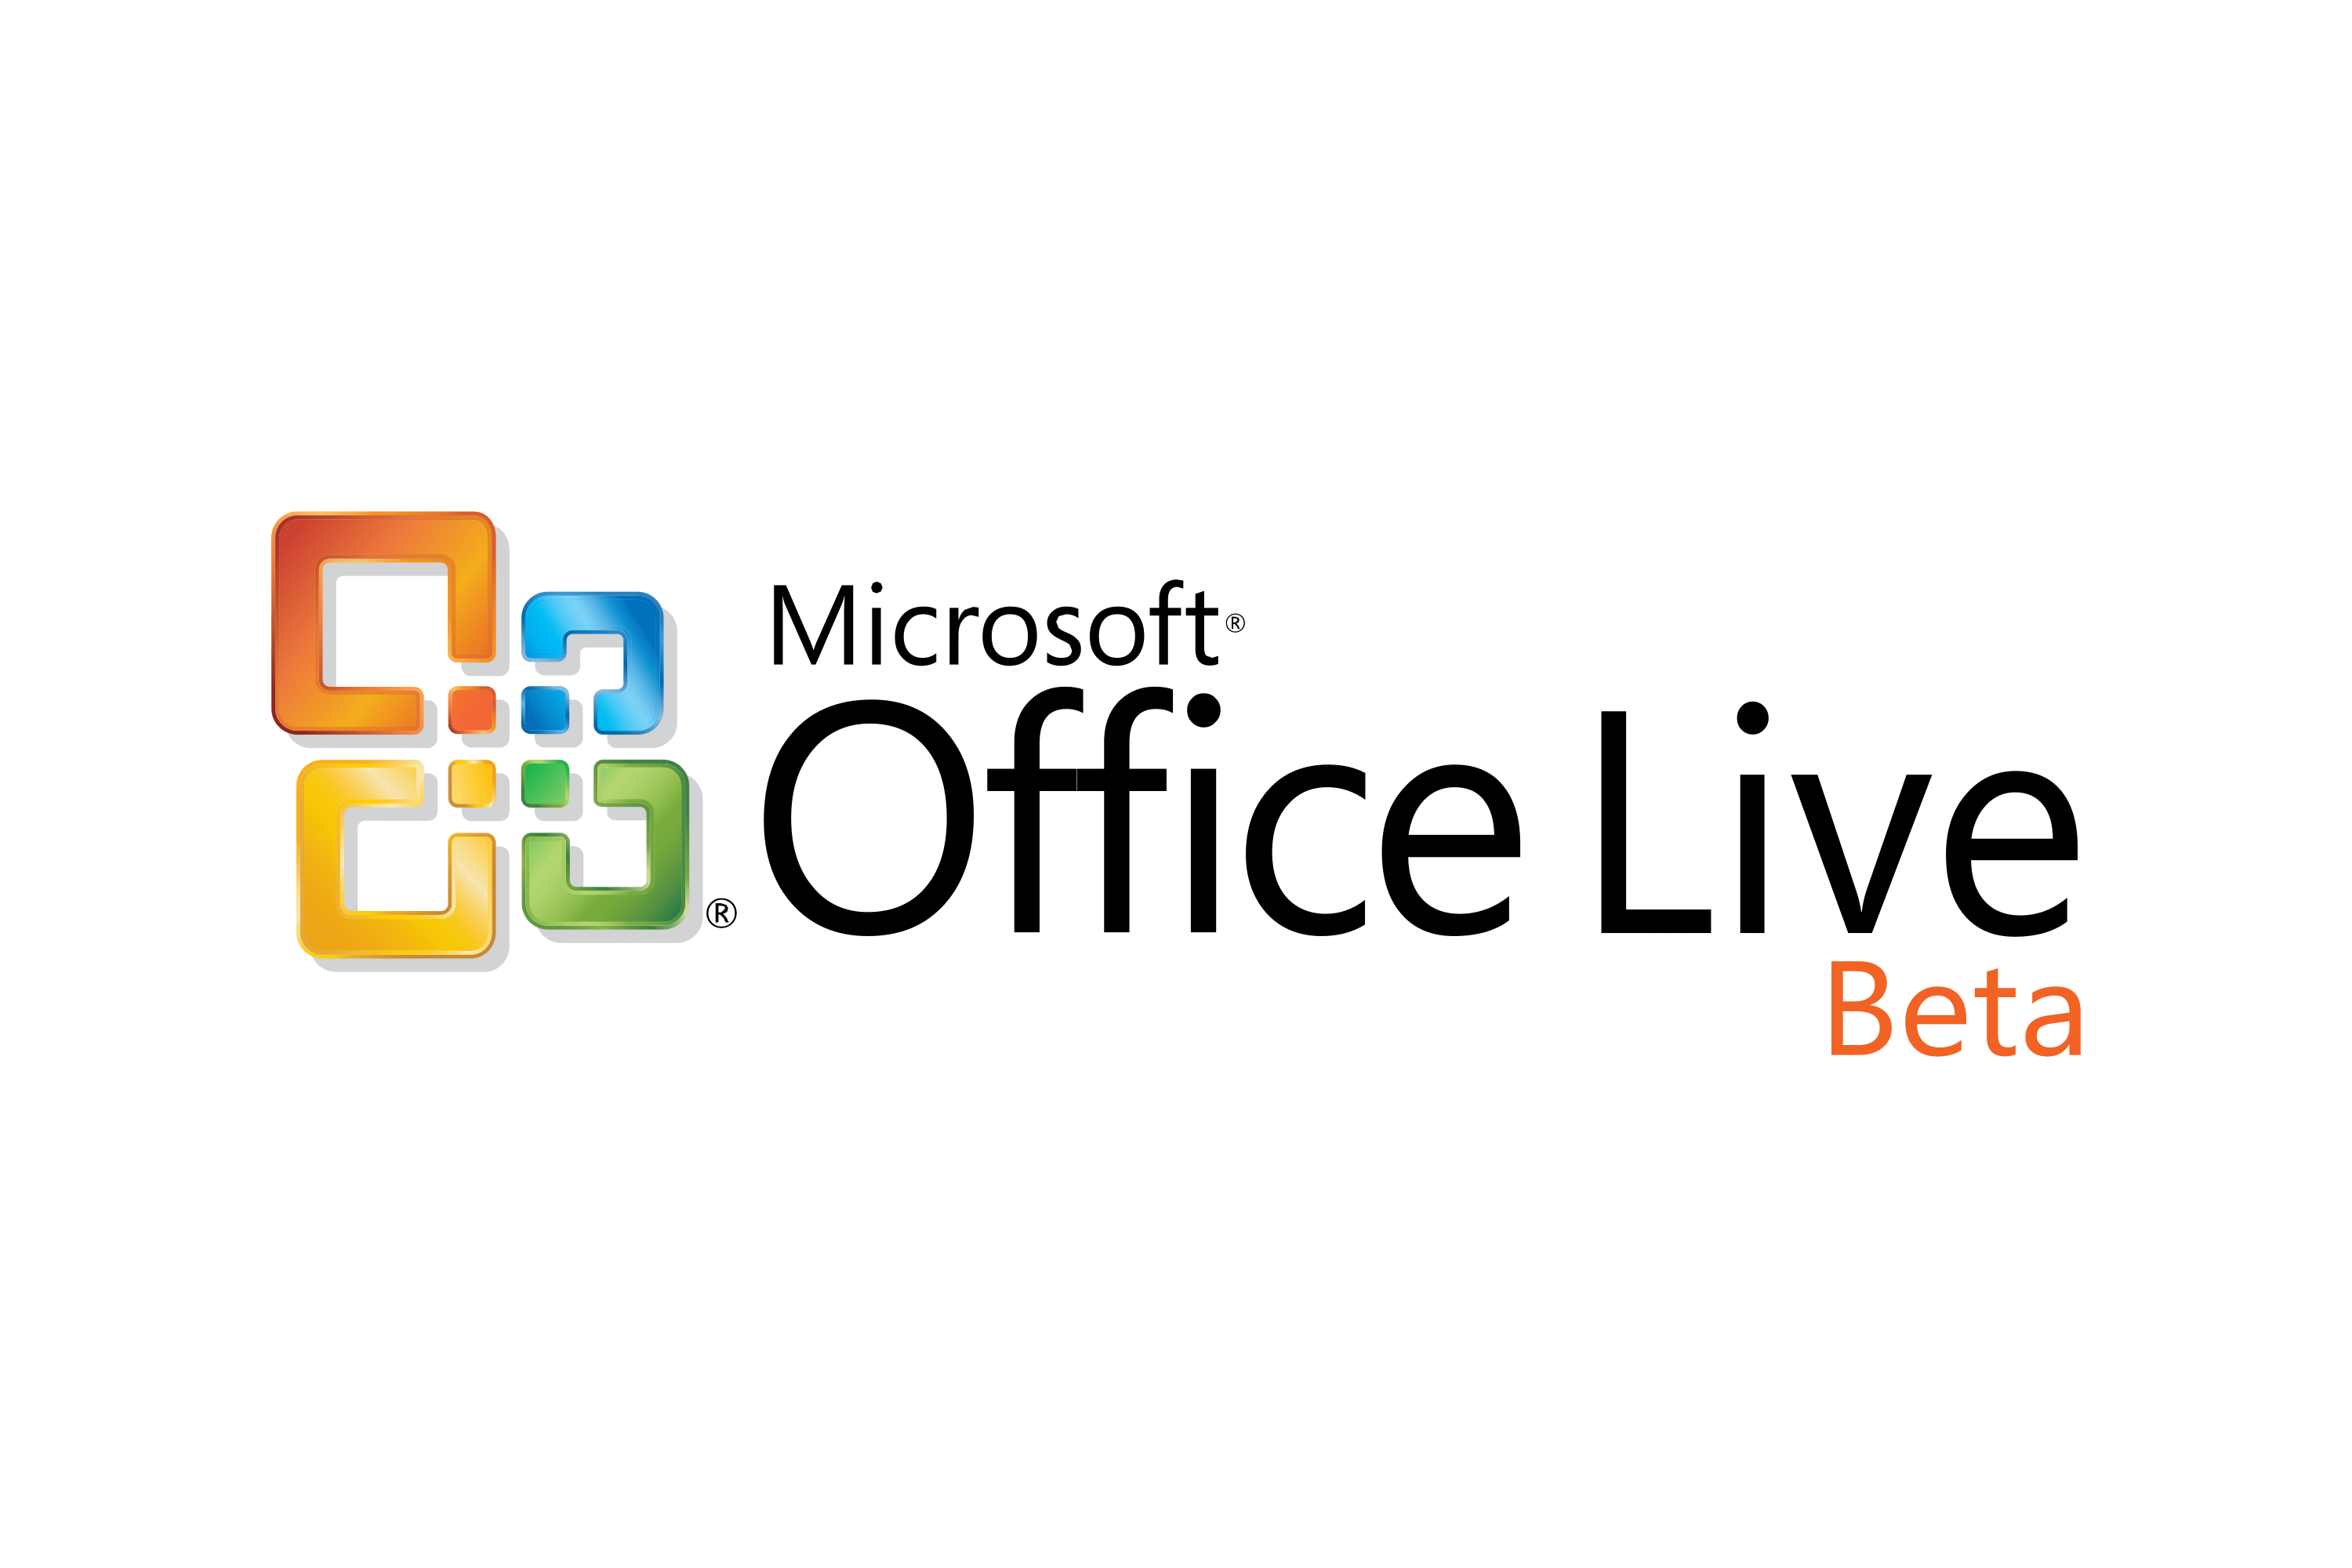 Download Microsoft Office Live Logo in SVG Vector or PNG File Format -  